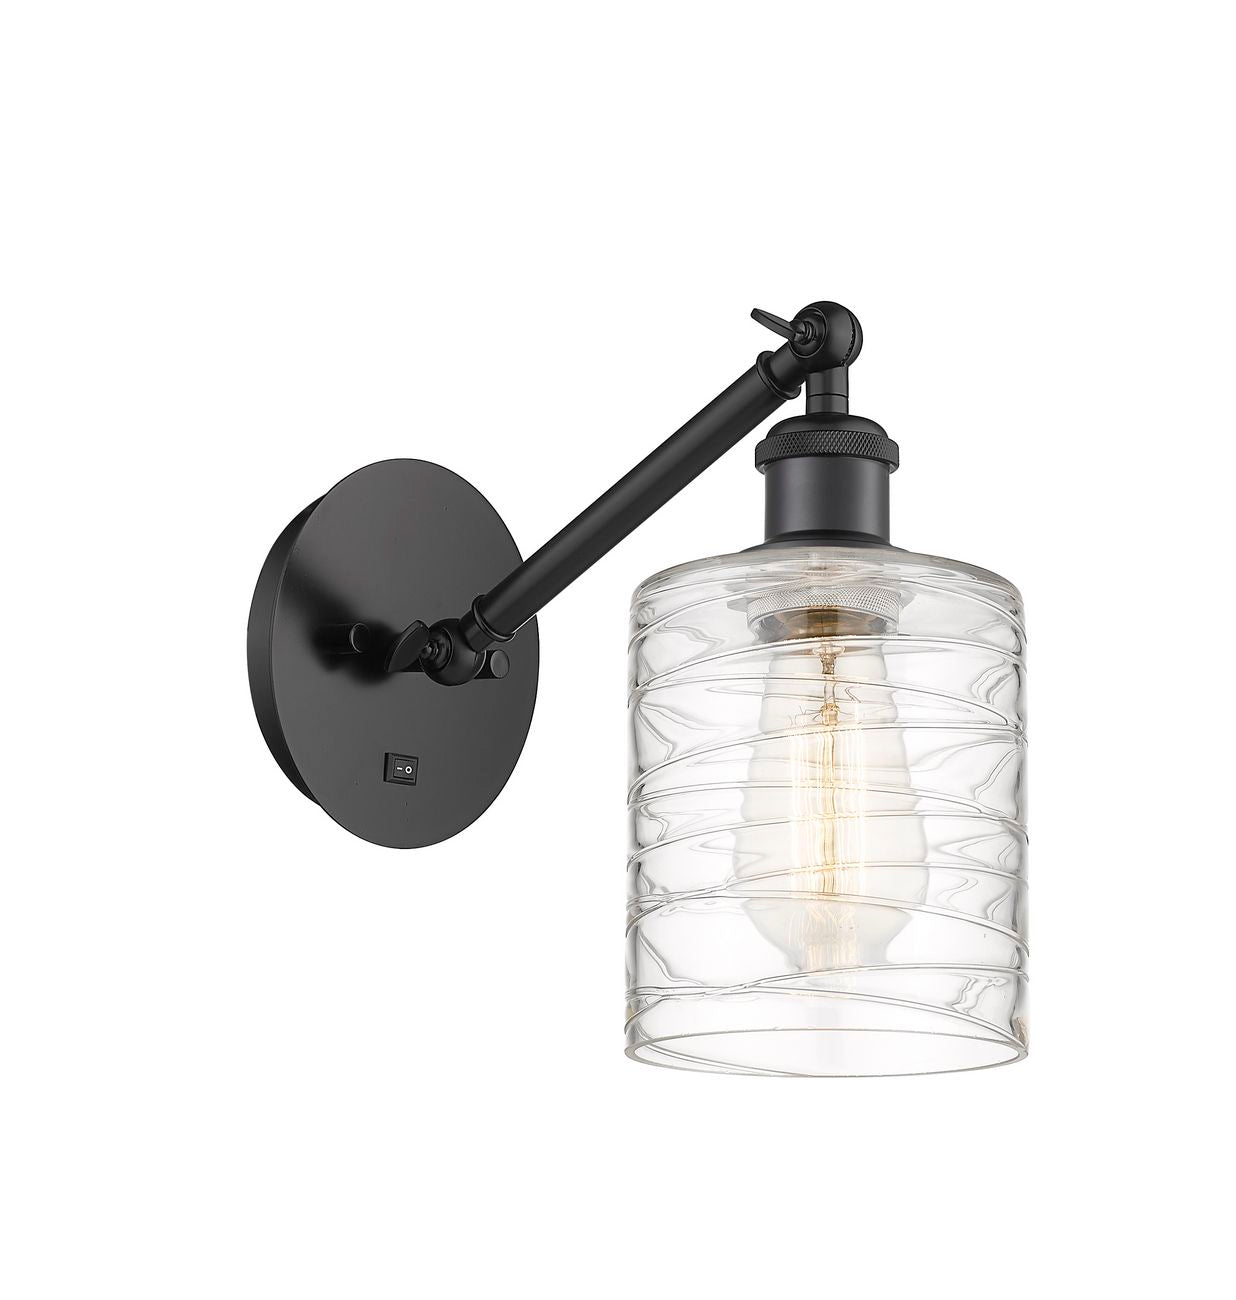 317-1W-BK-G1113 1-Light 5.3" Matte Black Sconce - Deco Swirl Cobbleskill Glass - LED Bulb - Dimmensions: 5.3 x 12.5 x 12.75 - Glass Up or Down: Yes